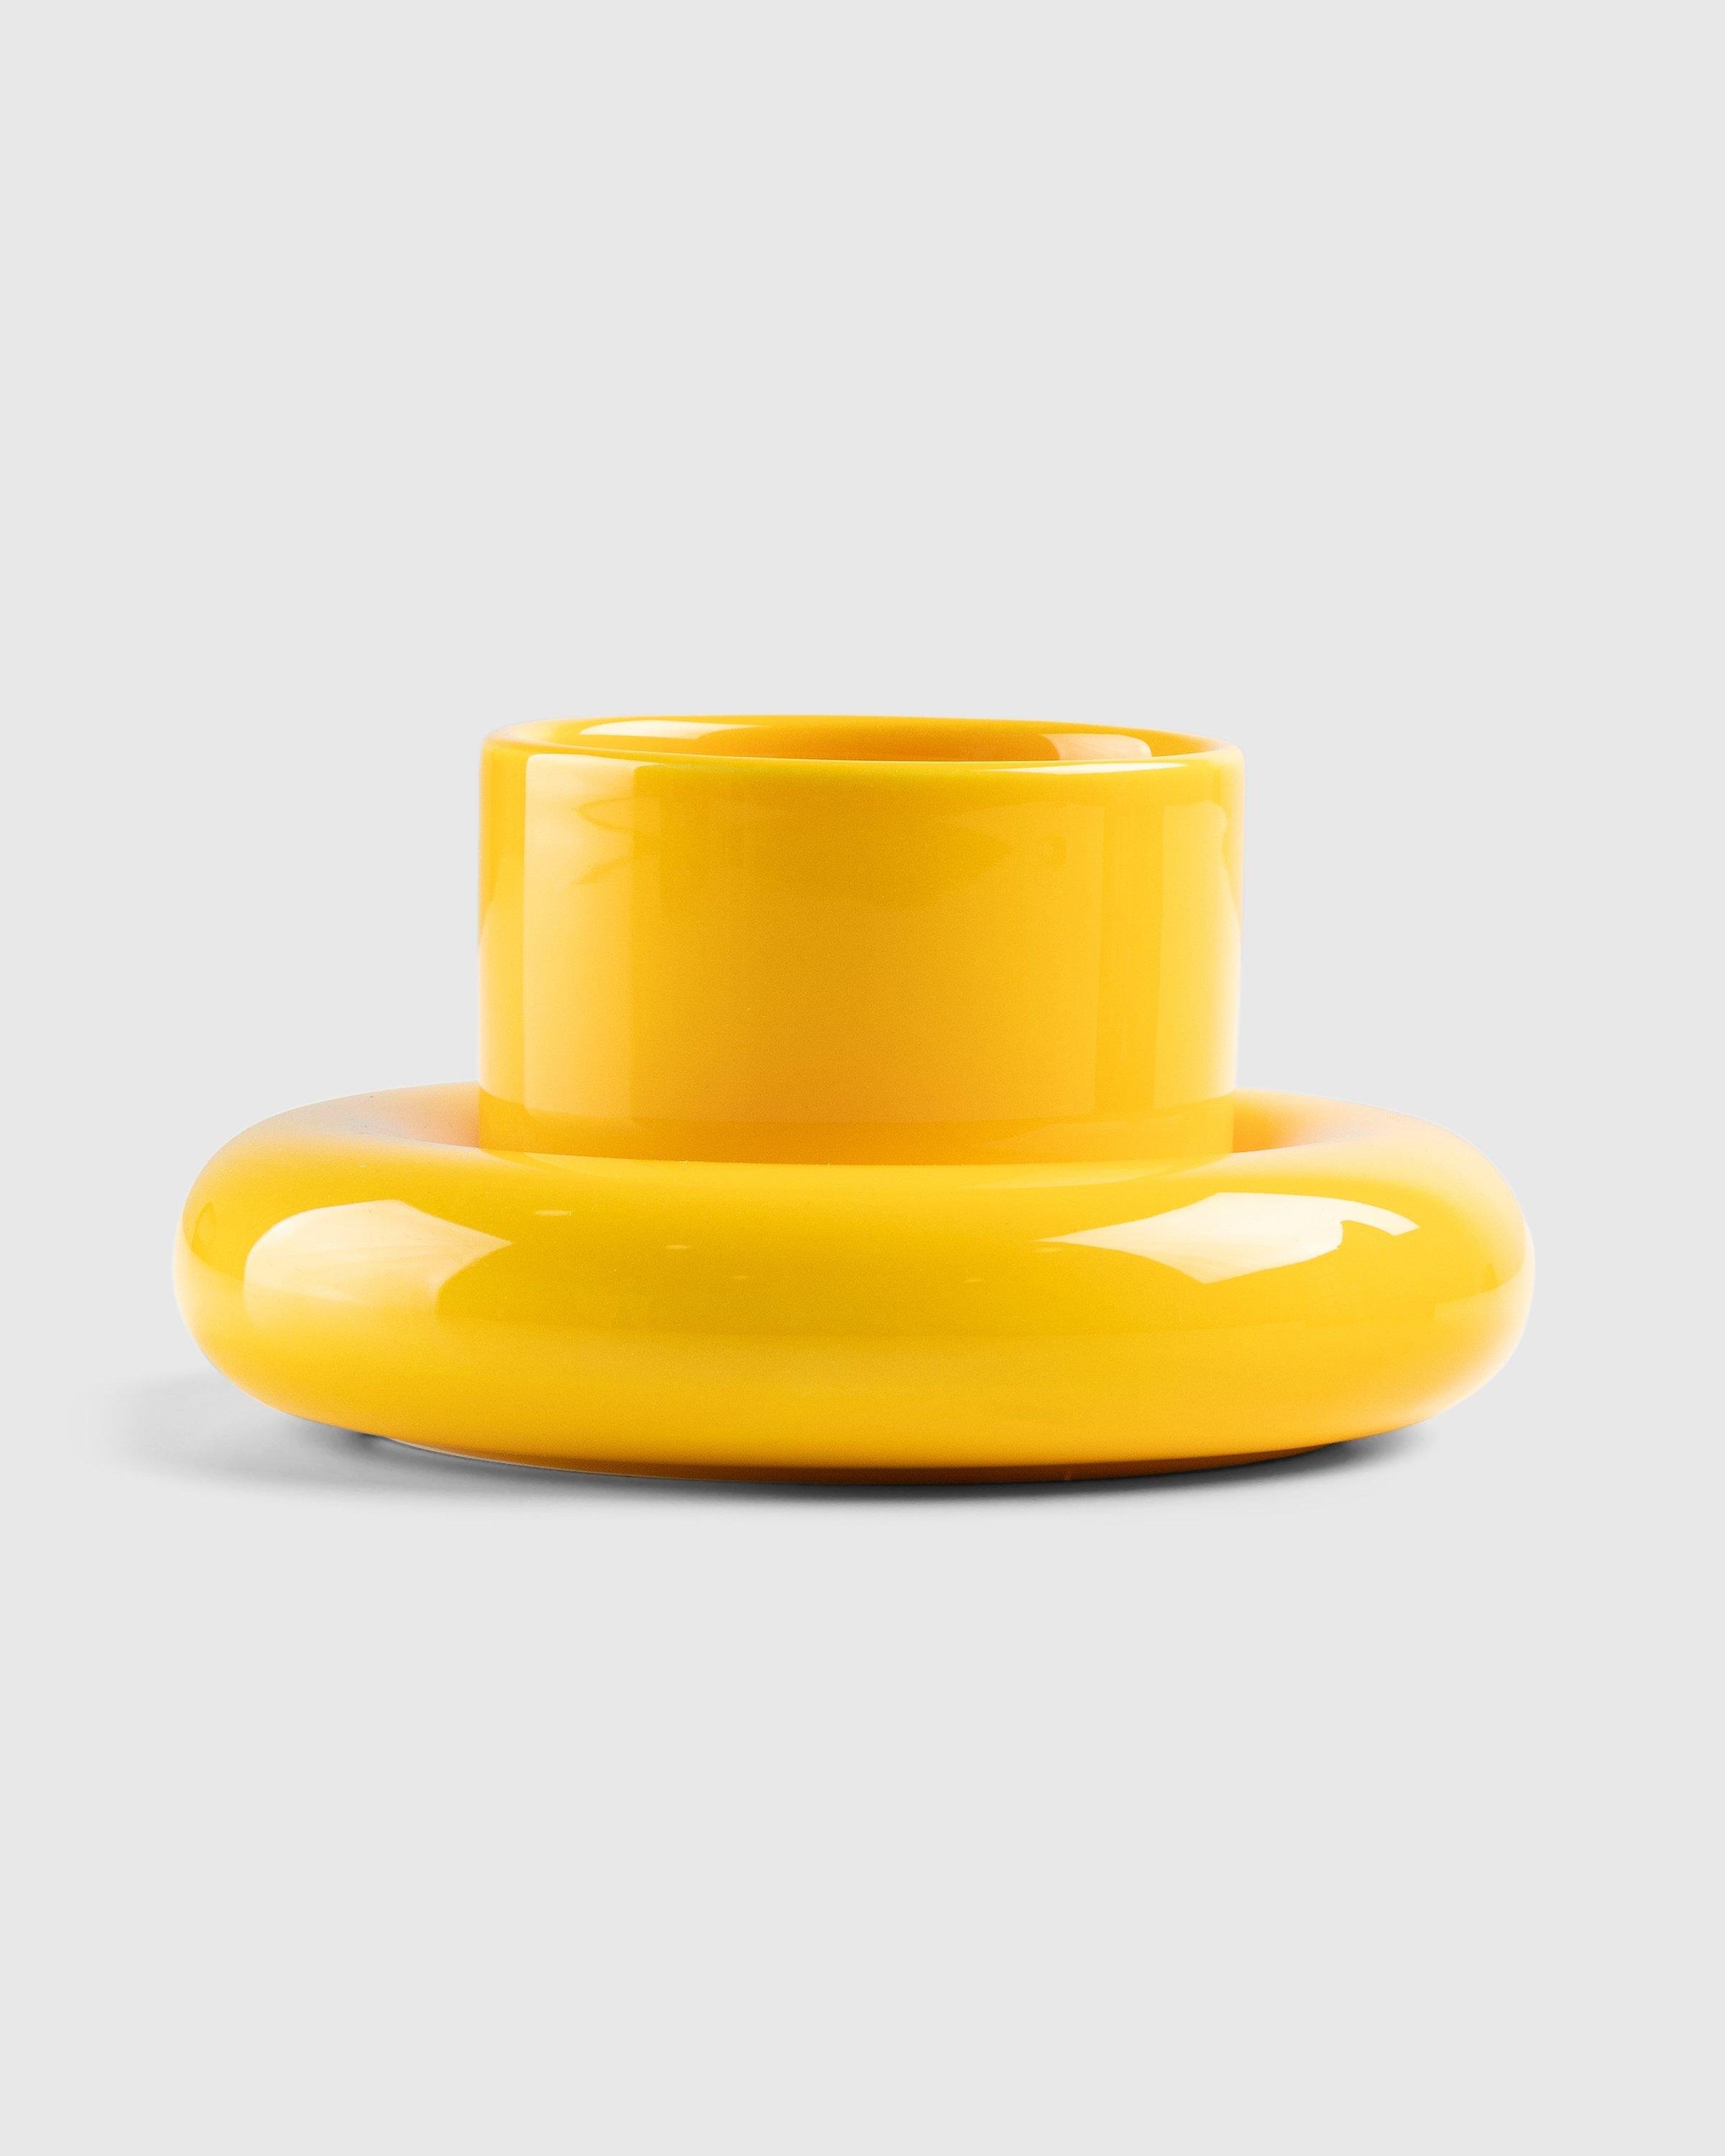 Gustaf WestmanChunky Cup Yellow by HIGHSNOBIETY